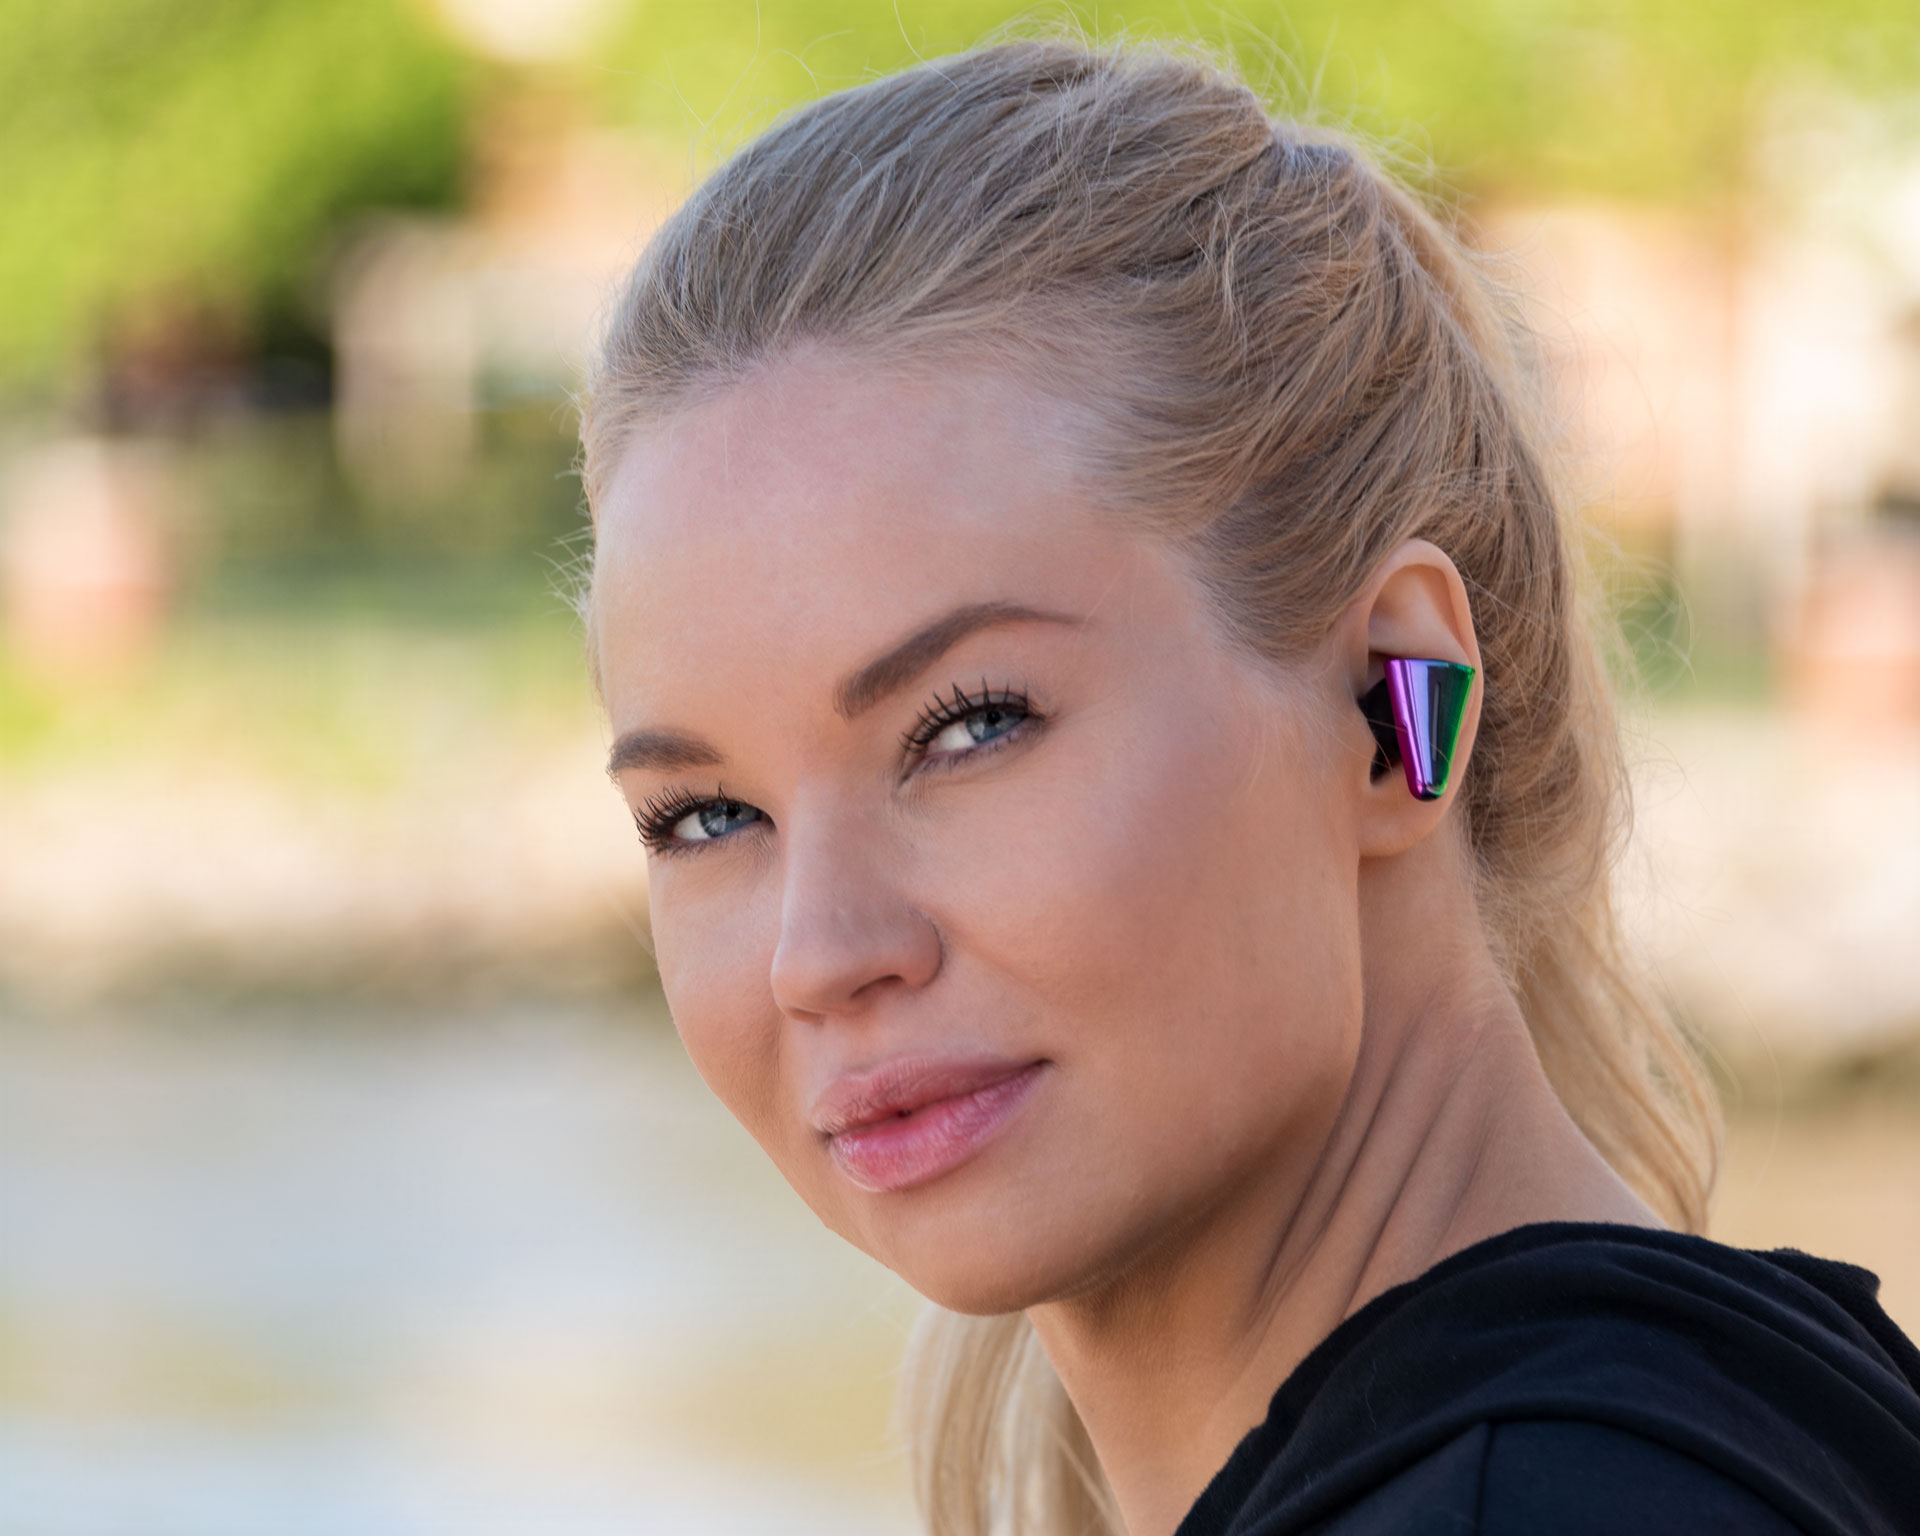 Angry Miao Cyberblade Earbuds Review - Book of Adam Z